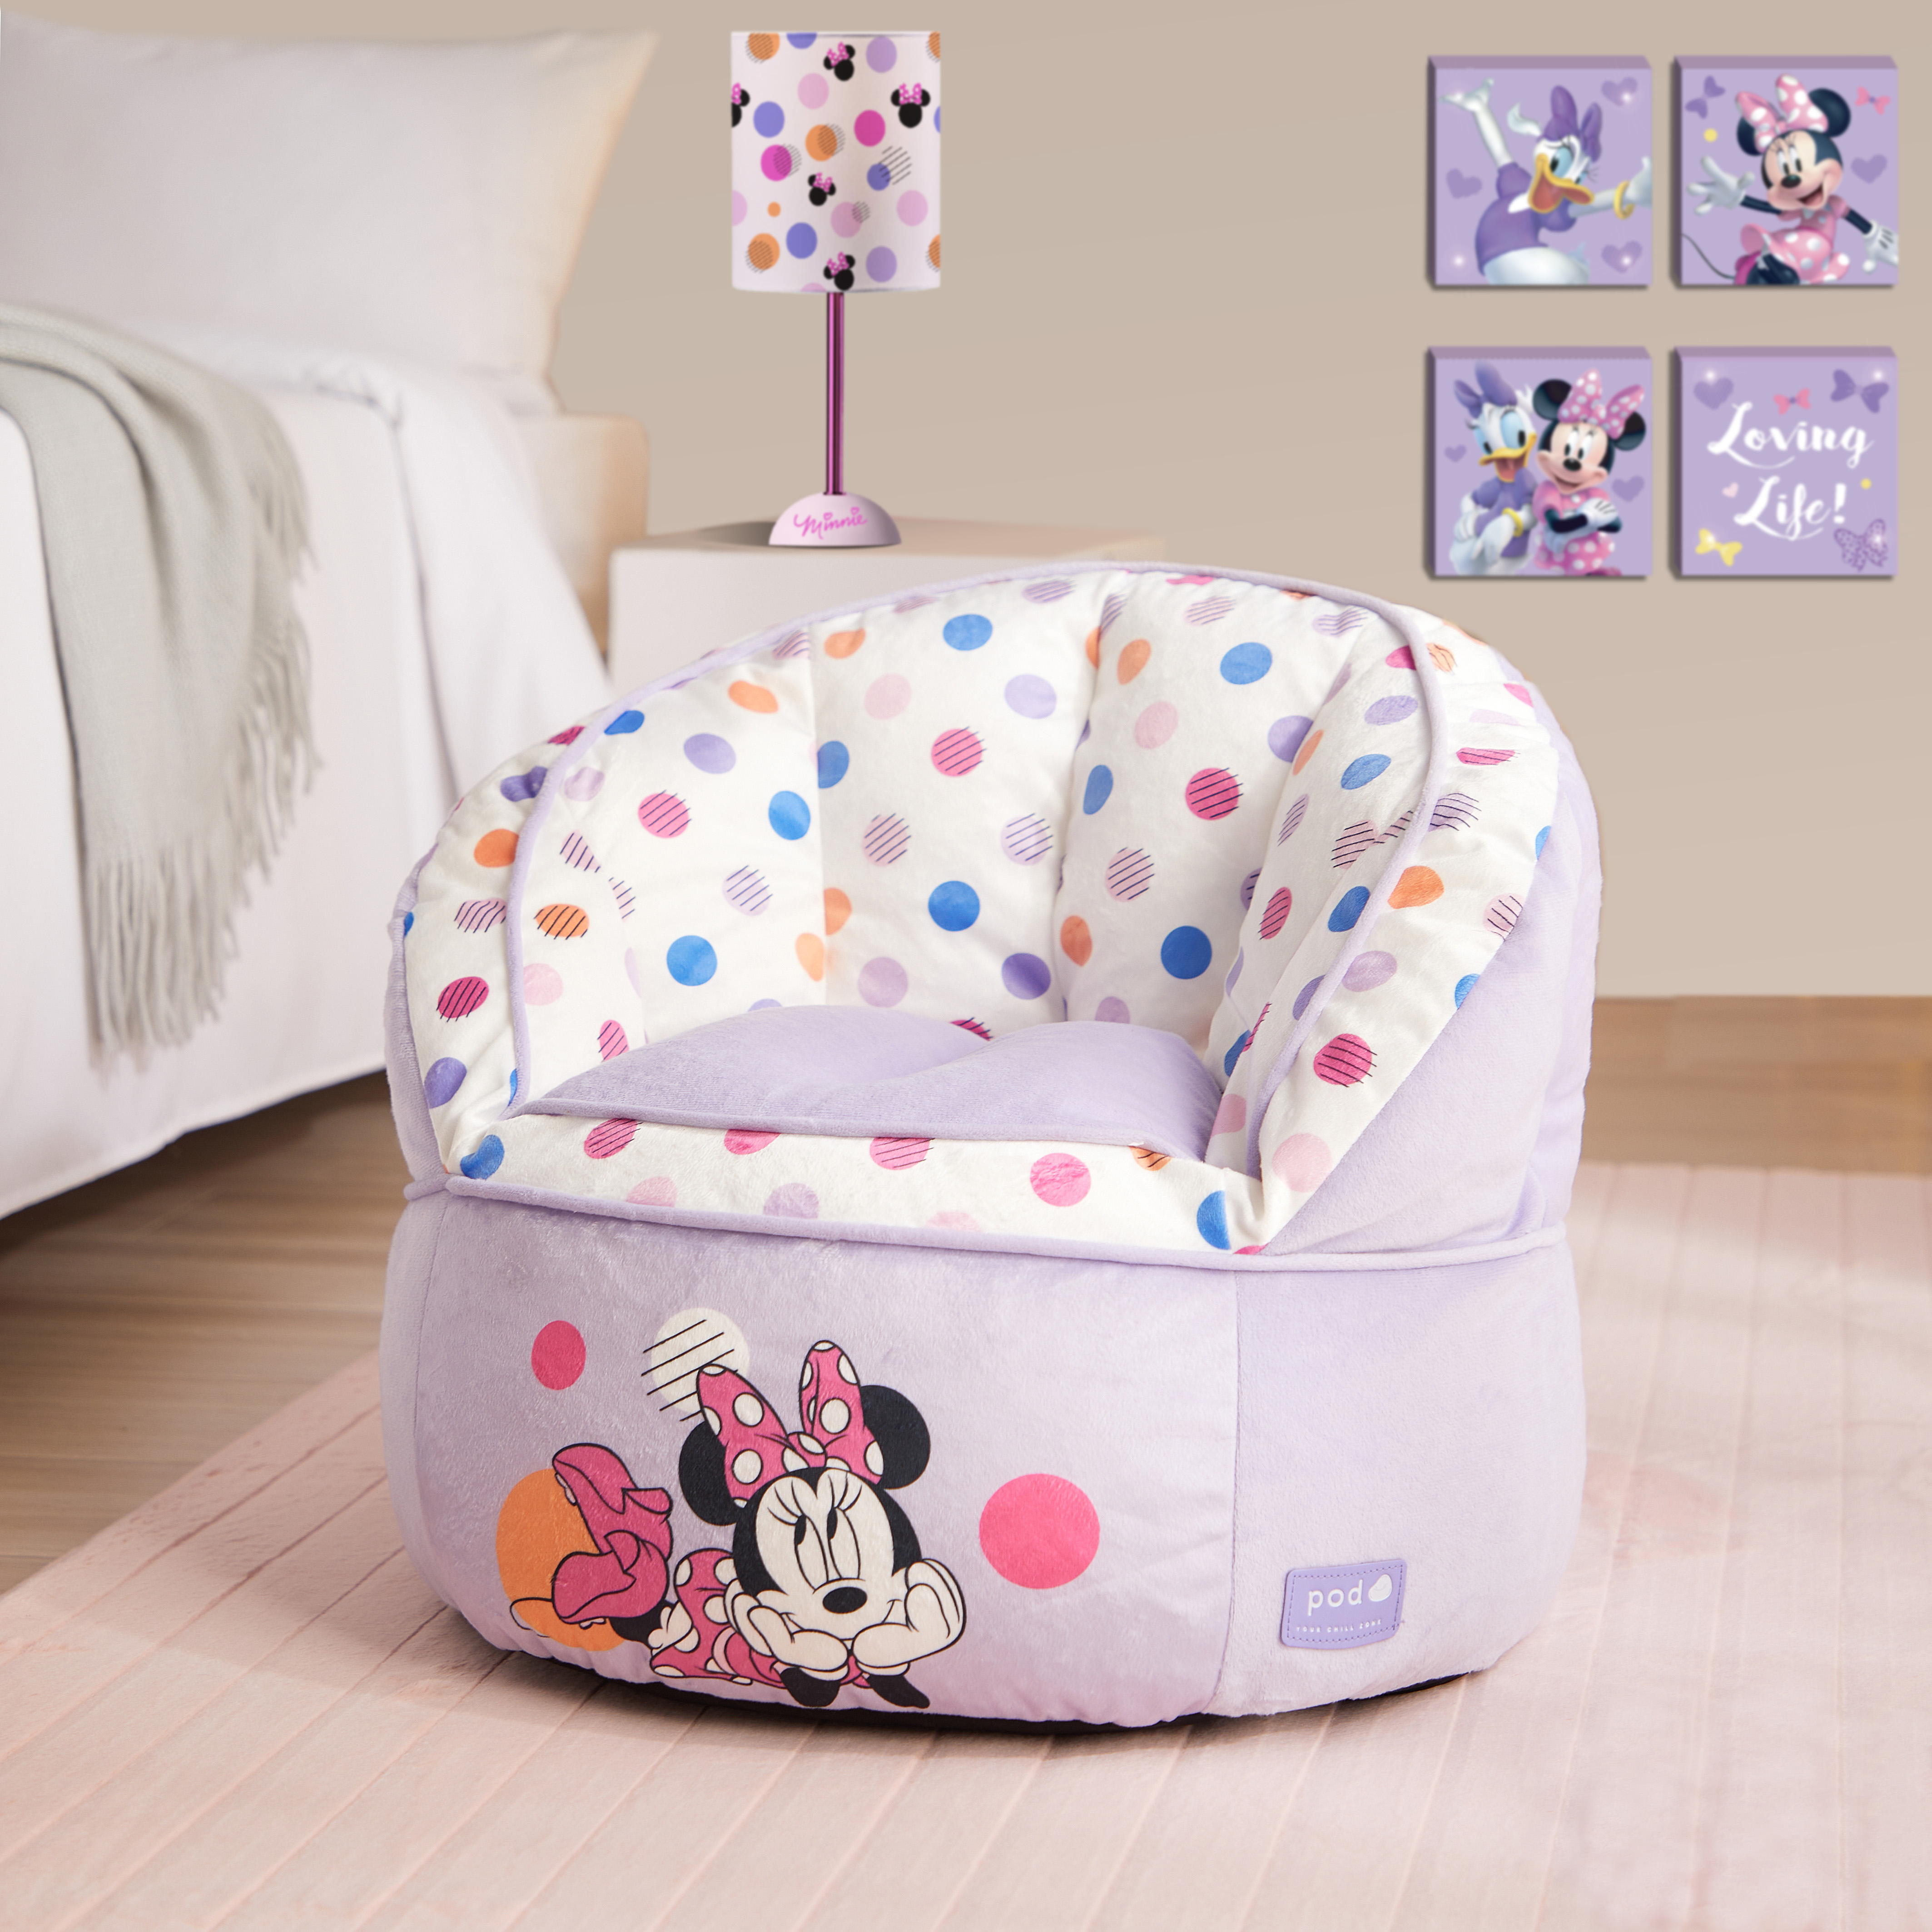 Disney Minnie Mouse Purple Polyester Bean Bag Chair - image 2 of 8